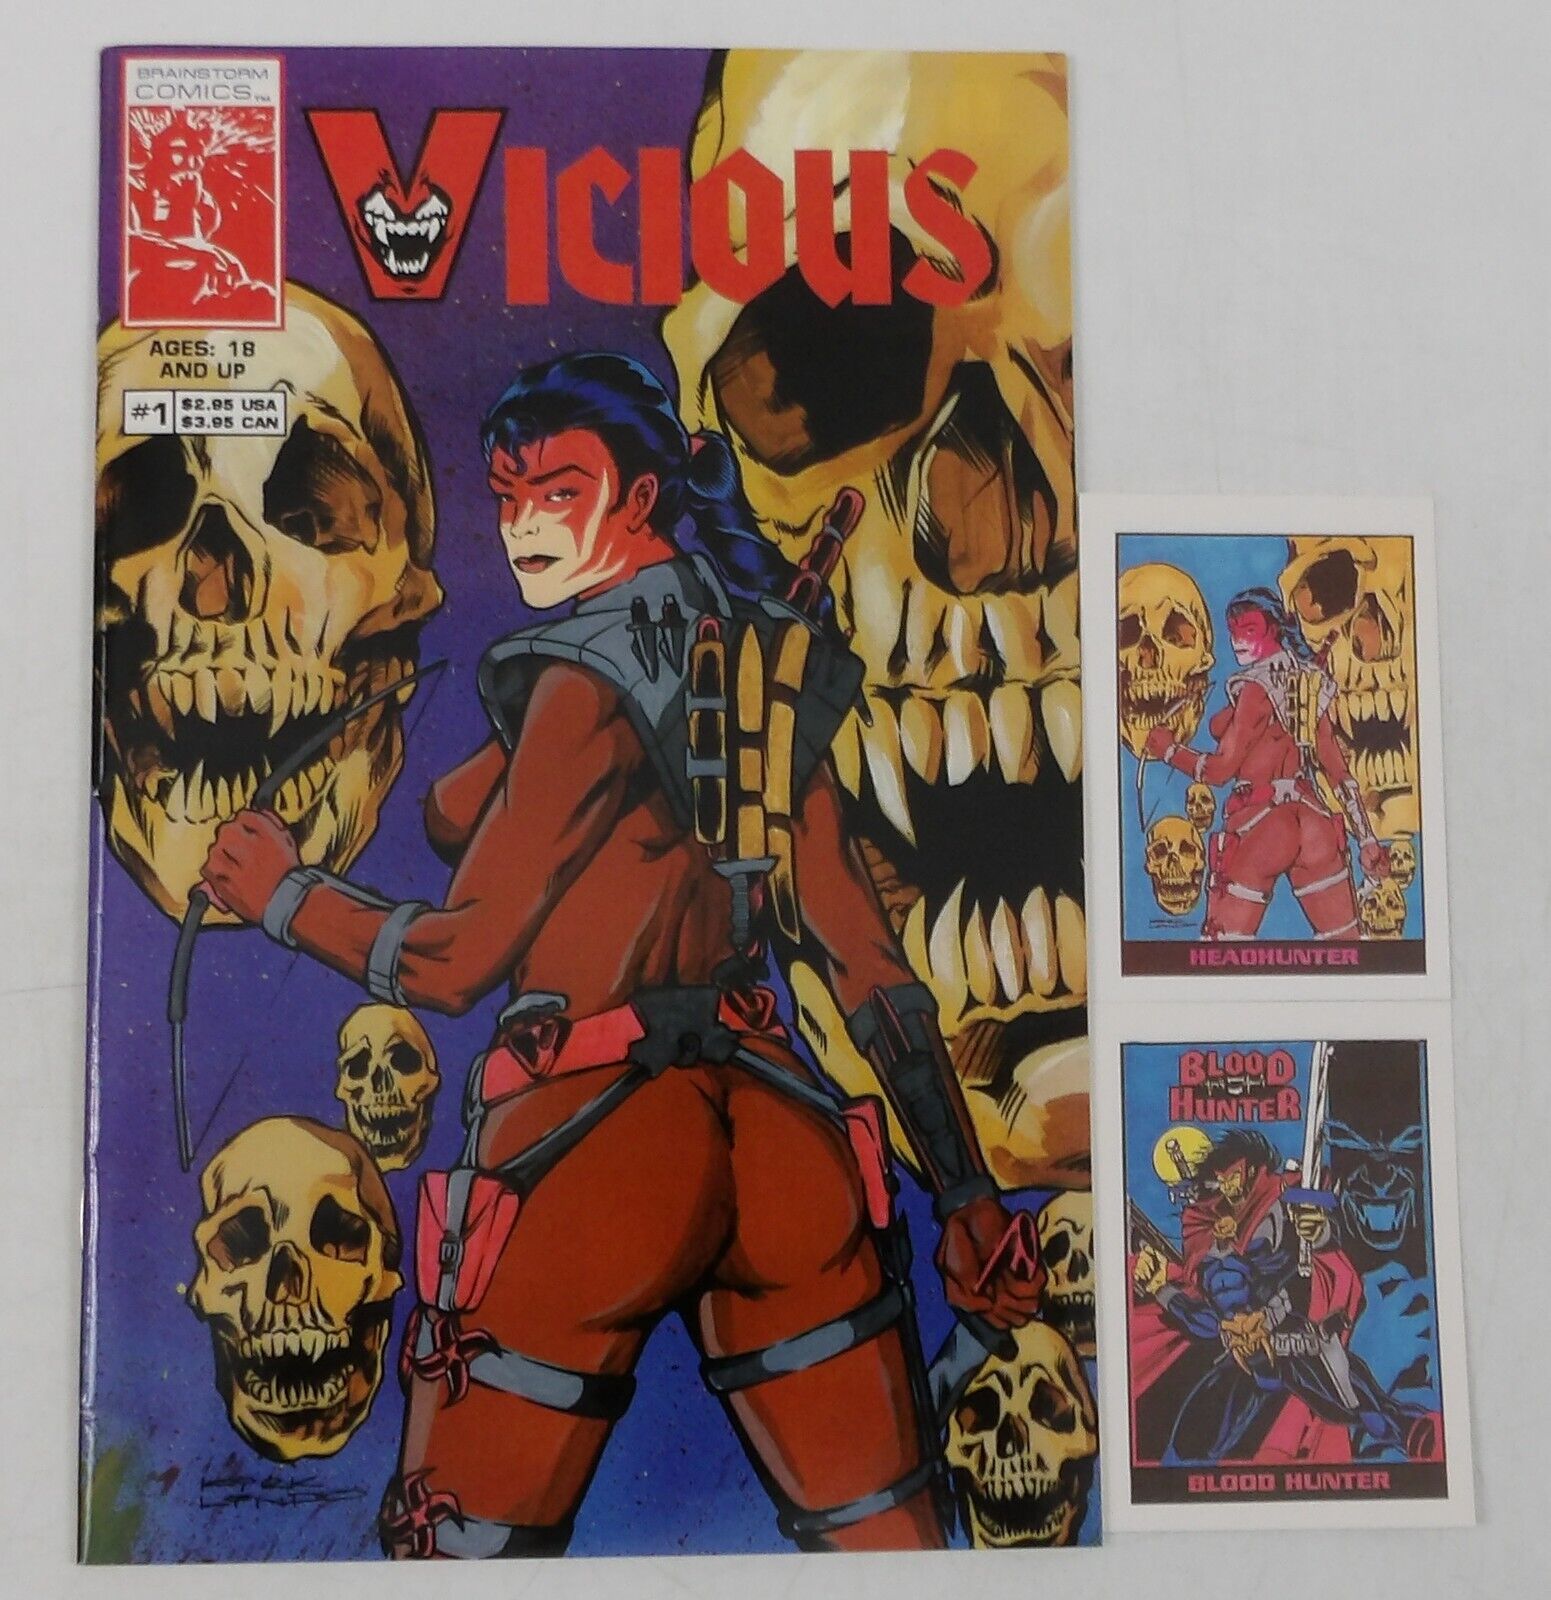 Vicious #1 FN Limited Trading Card Edition - Brainstorm Comics - Bad Girl